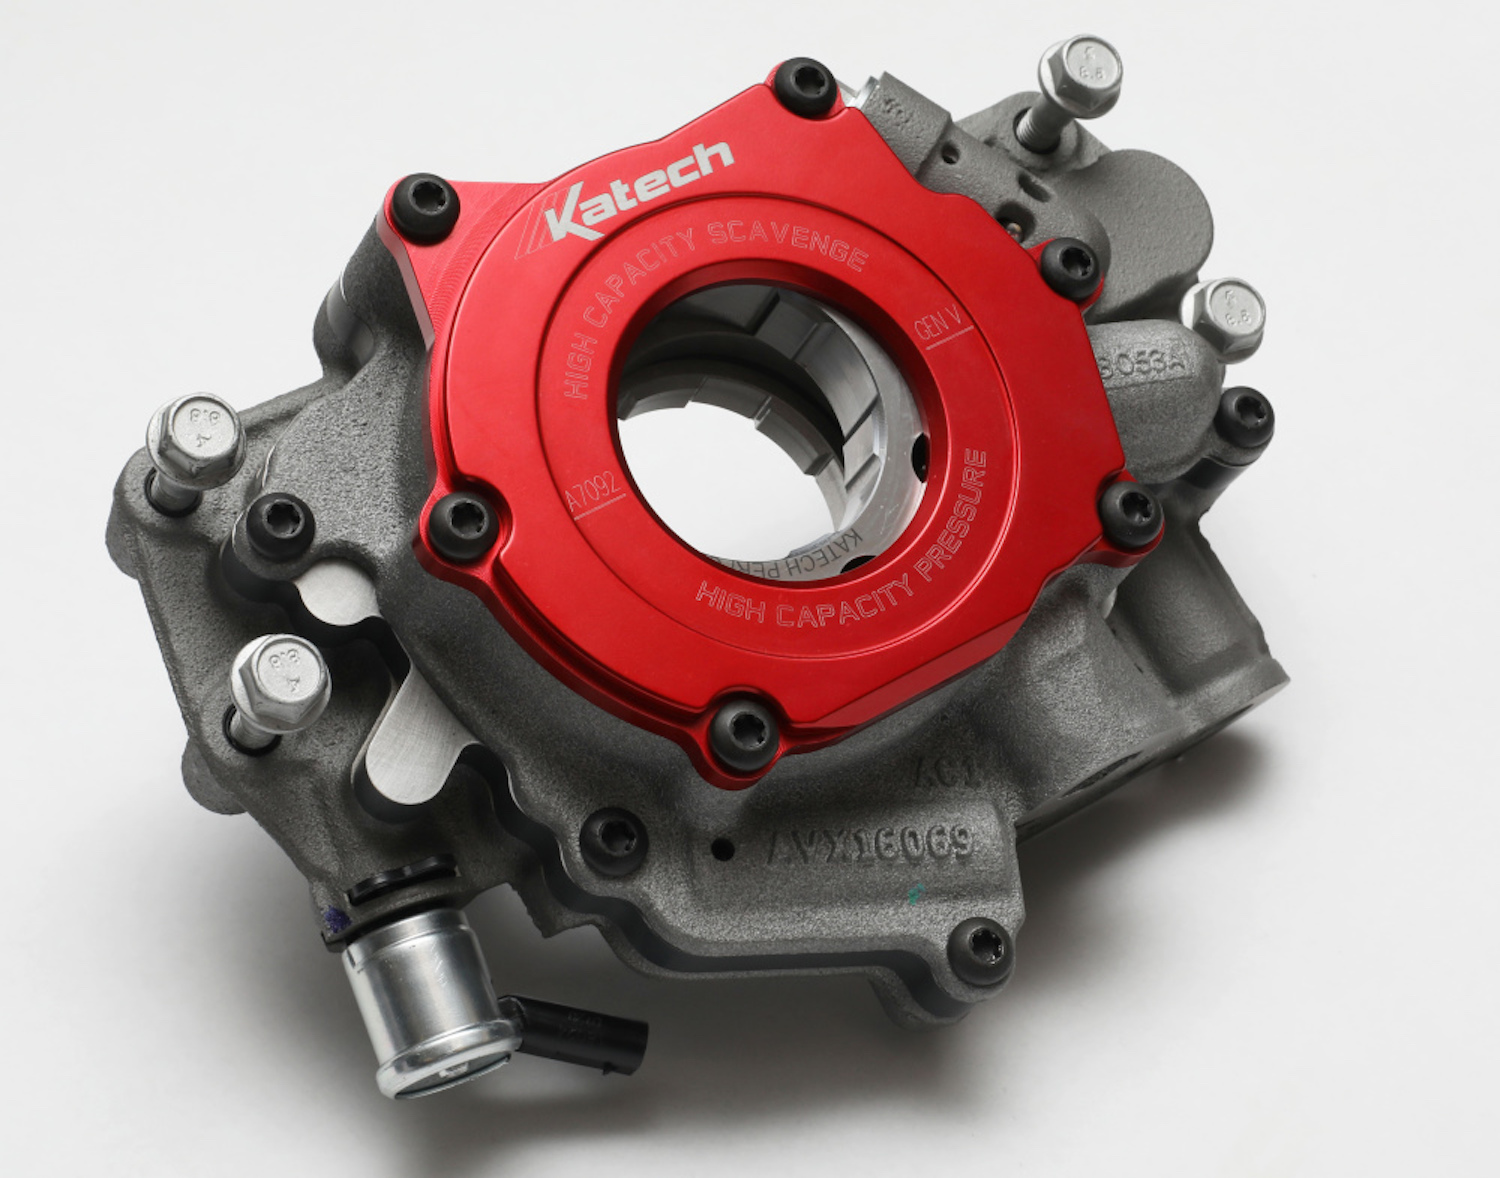 Katech Introduces New Oil Pump For GM LT Engines: Video